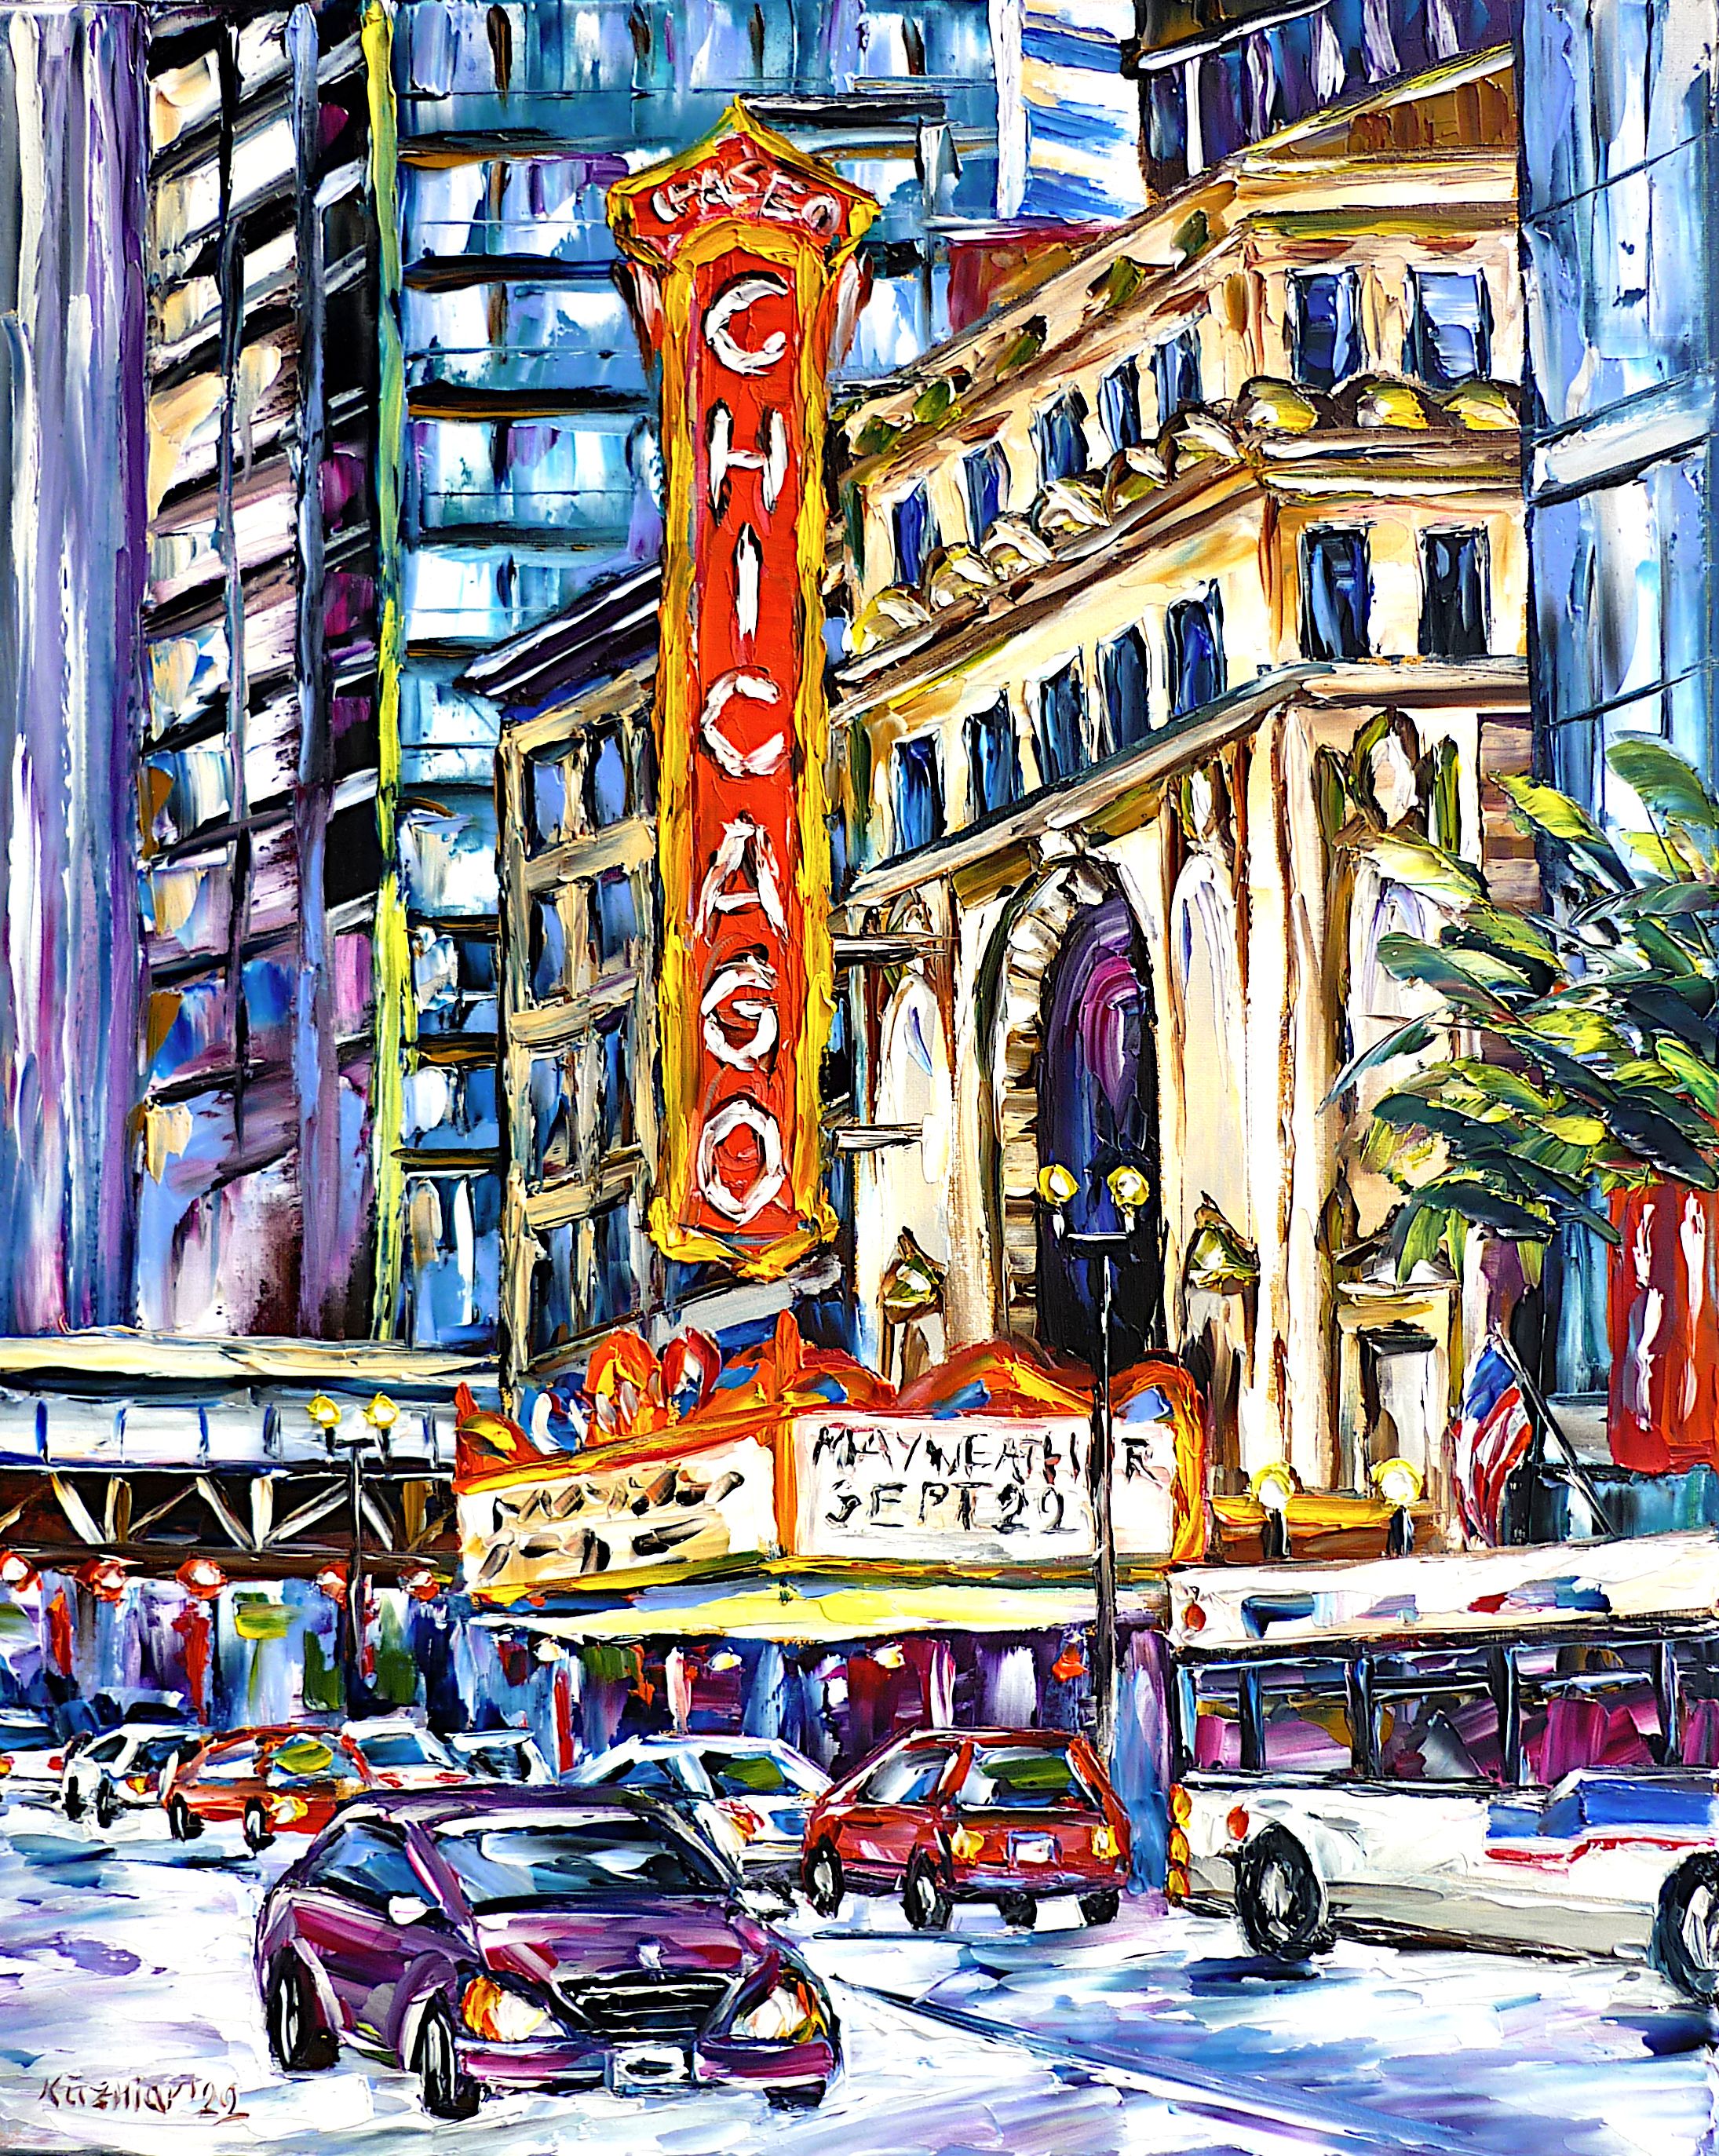 chicago theatre oil painting,chicago theater picture,chicago street scene,chicago city scene,streets of chicago,chicago cityscape,chicago road traffic,chicago cars,chicago bus,chicago state street,chicago buildings,chicago streetscape,us flag,flag of the united states of america,stars and stripes,chicago love,chicago lovers,i love chicago,chicago beauty,chicago alive,chicago life,chicago colorful,city life,chicago abstract,city theater,palette knife oil painting,modern art,impressionism,abstract painting,lively colors,colorful painting,bright colors,light reflections,impasto painting,figurative